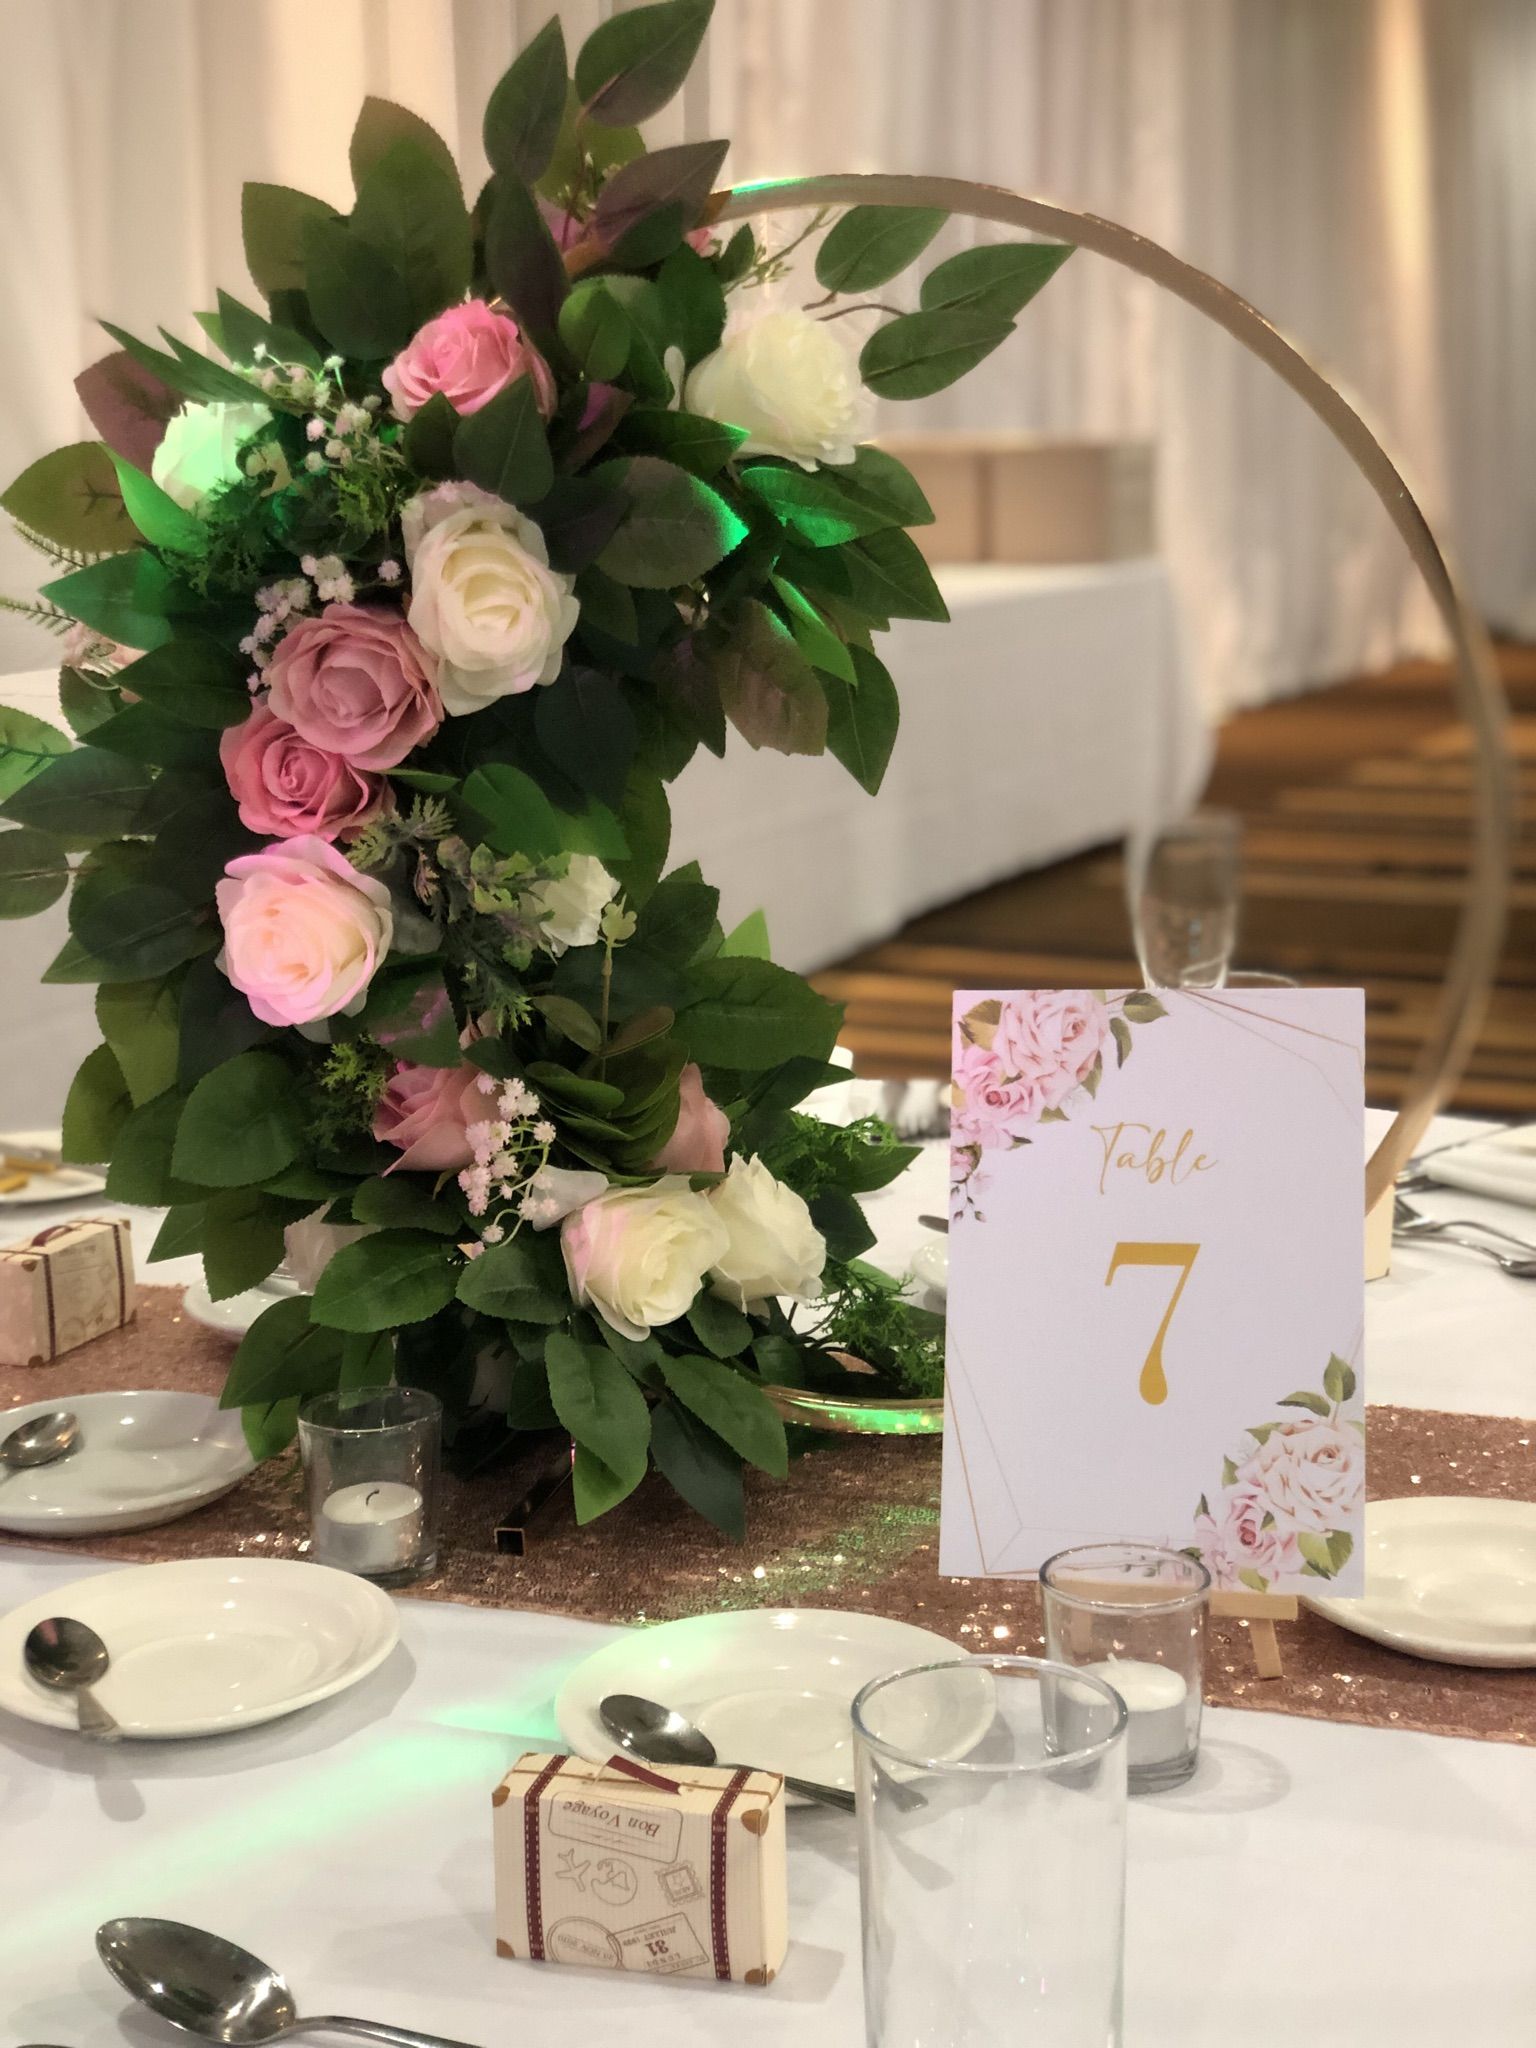 a table is set with flowers and place cards.